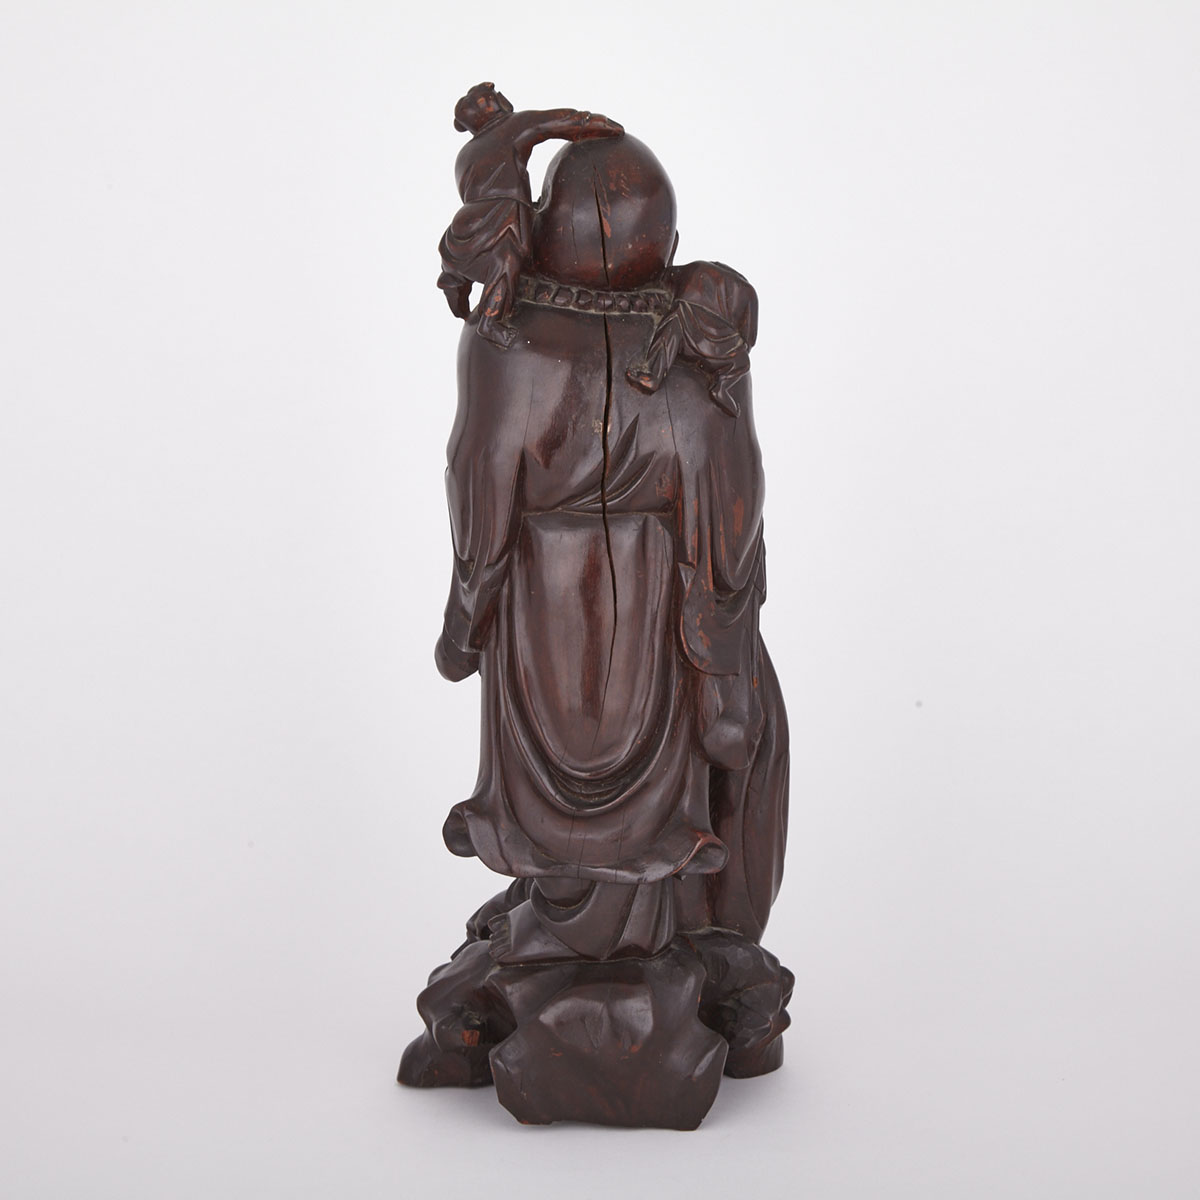 A Boxwood Carving of Buddha with Boys, Early 20th Century